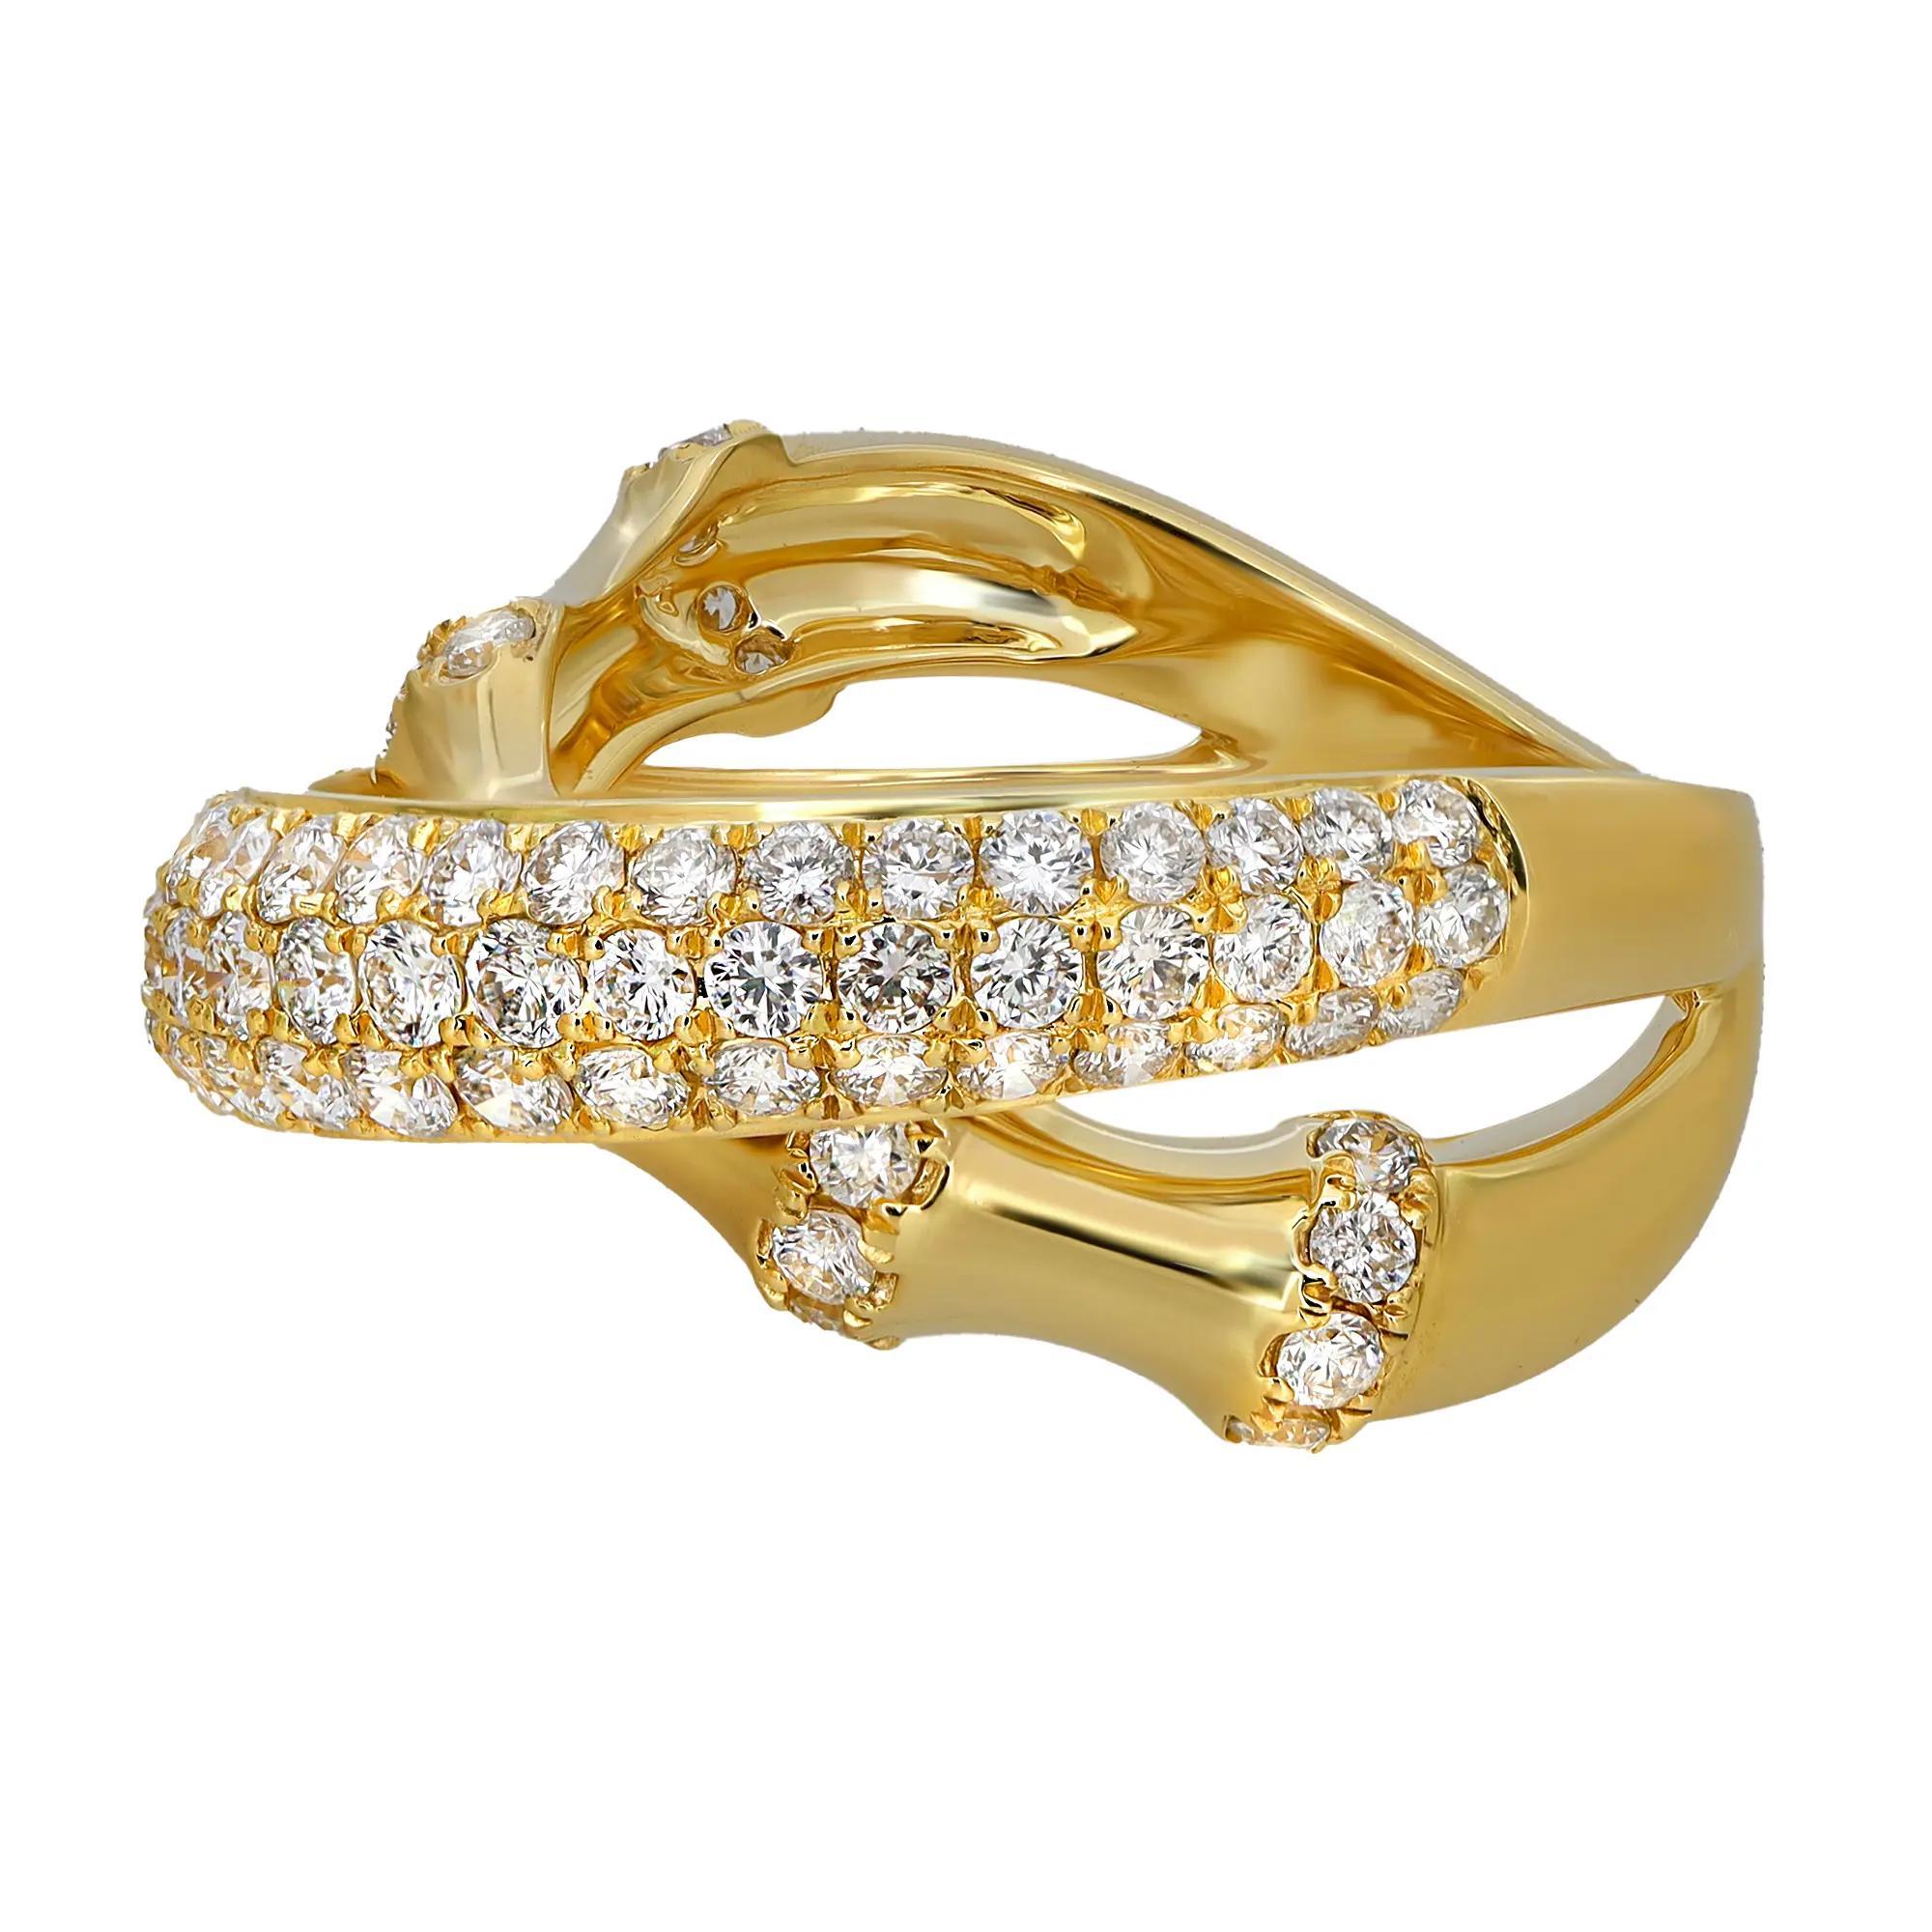 This luxurious diamond crossover band ring is perfectly crafted in lustrous 18K yellow gold. This gorgeous ring features round brilliant cut dazzling diamonds in pave setting. Total diamond weight: 1.71 carats. Diamond Quality: G-H color, VS-SI